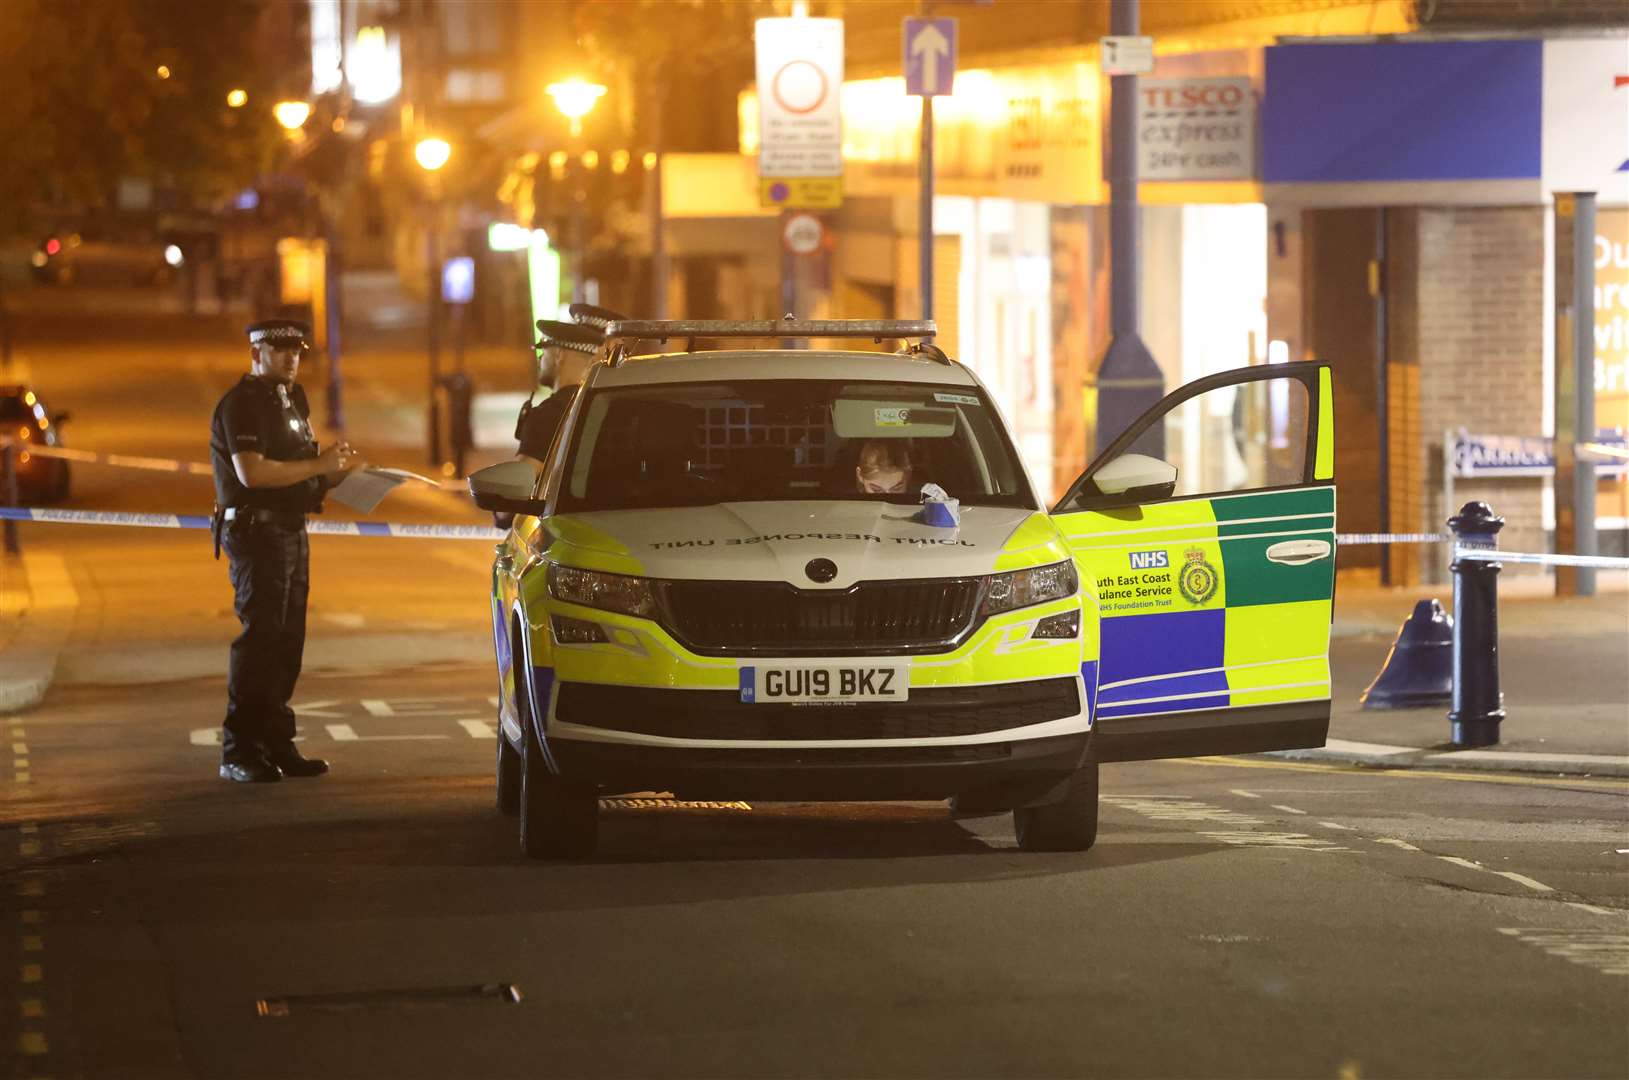 A cordon remains in place on New Road in Gravesend. Photo: UKNIP